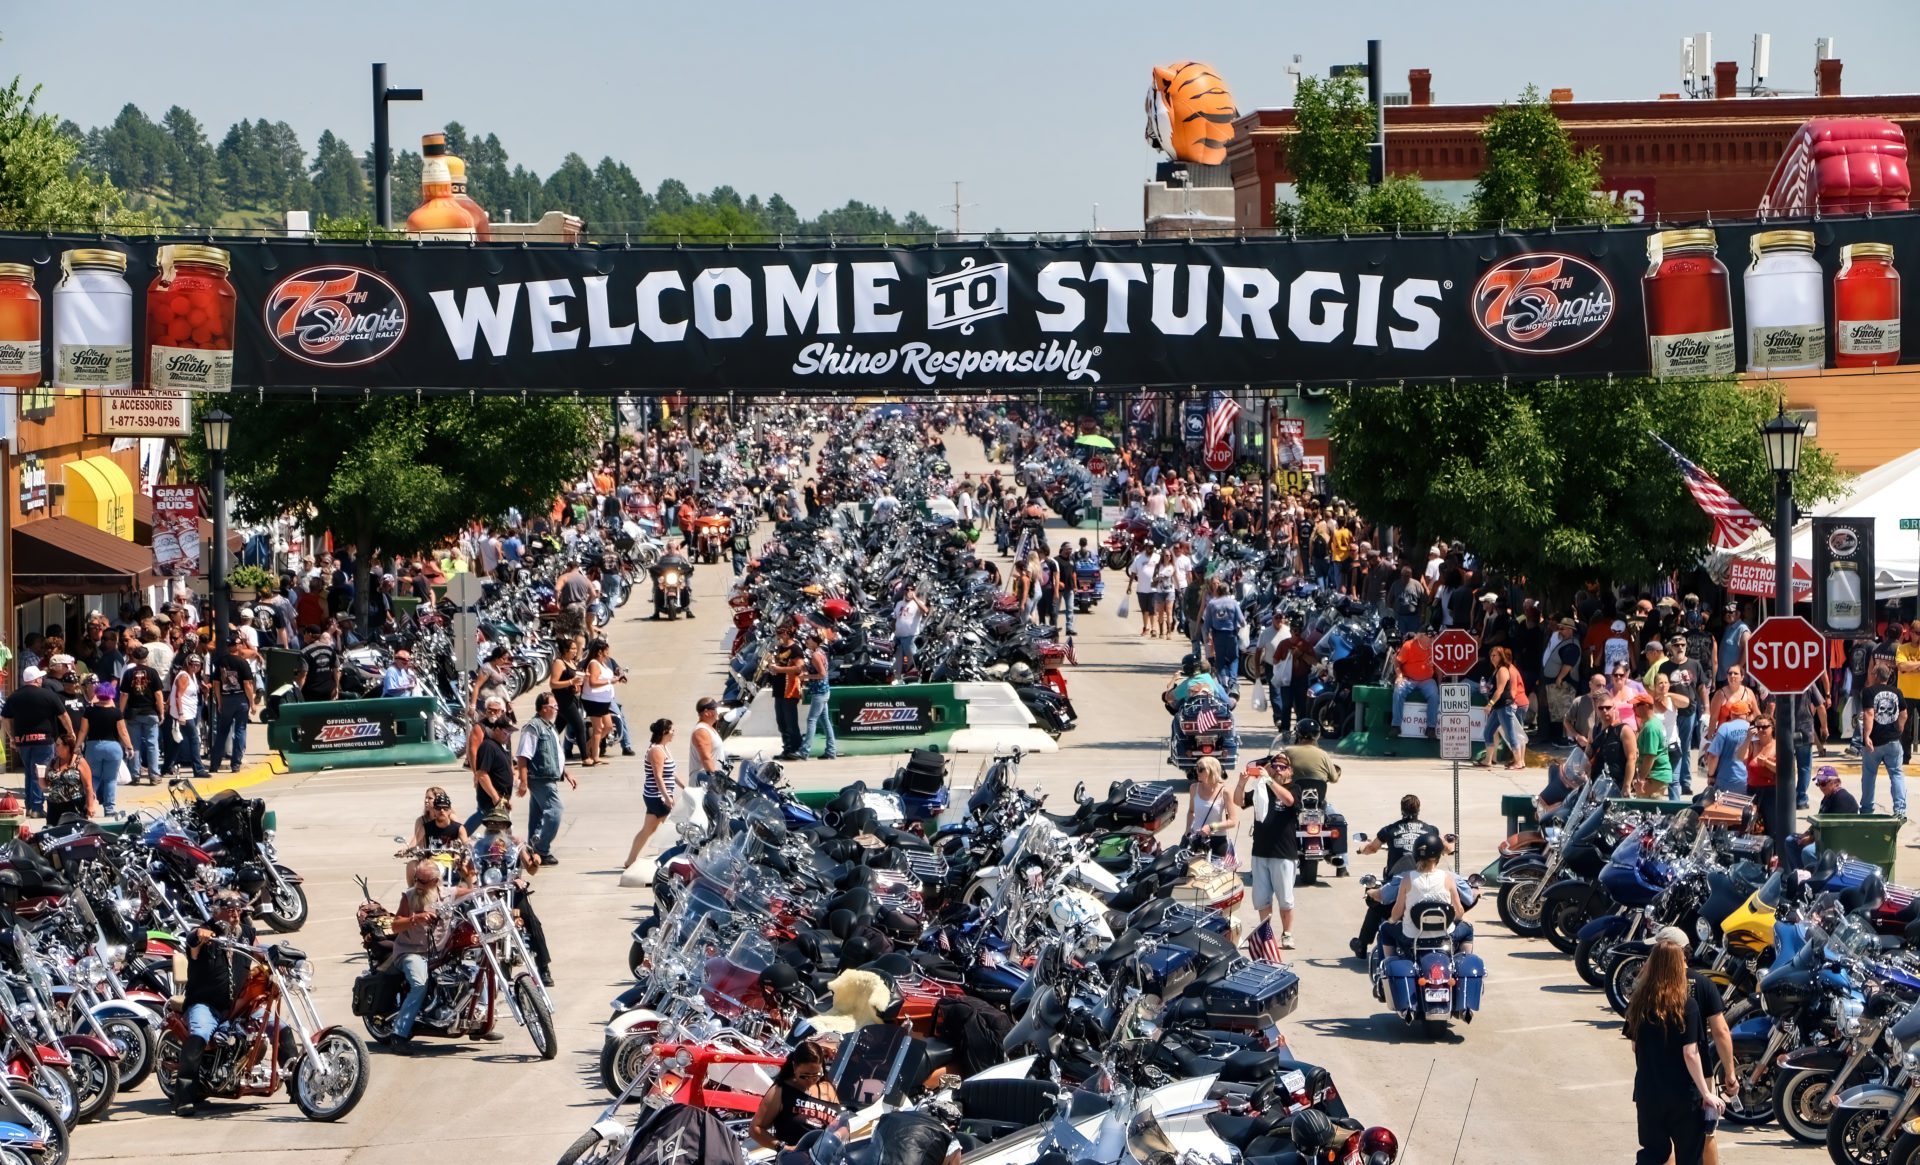 Sturgis Motorcycle Event – 10 Safety Tips: Riders Share Their Secrets